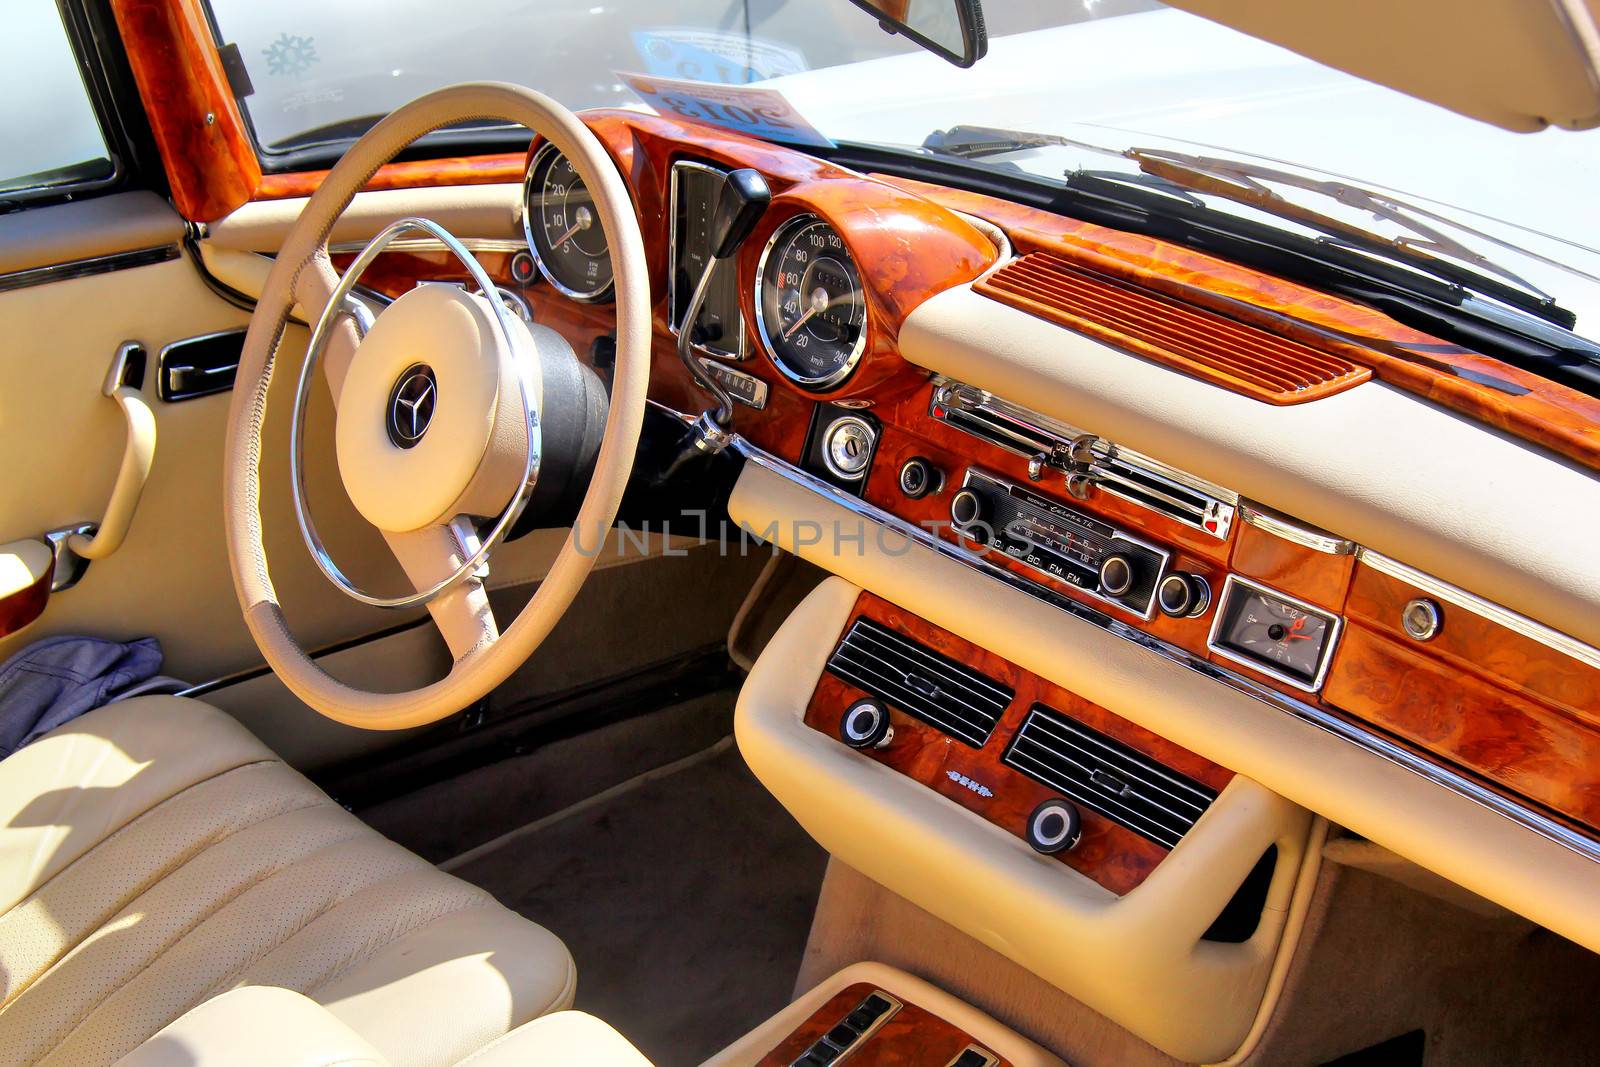 MOSCOW, RUSSIA - JUNE 2: Interior of german motor car Mercedes-Benz W111 S-class taken park at the annual L.U.C. Chopard Classic Weekend Rally on June 2, 2013 in Moscow, Russia.